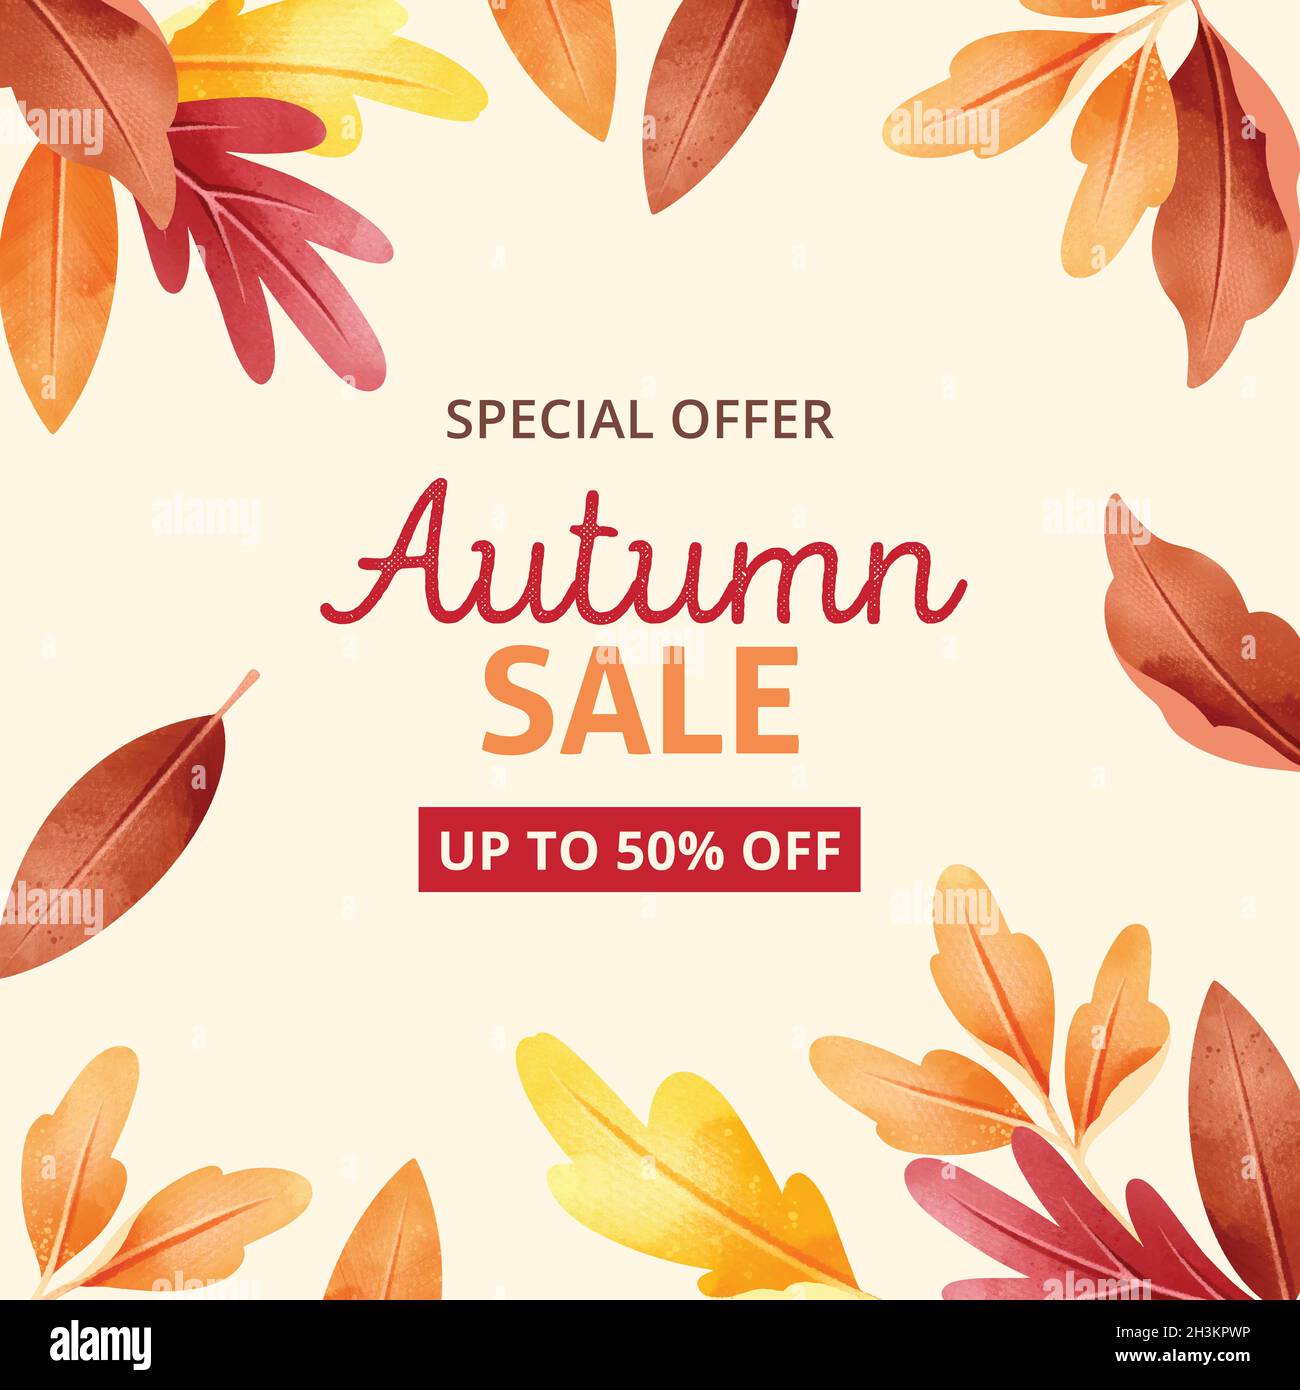 autumn sale with dried leaves vector design illustration Stock Vector